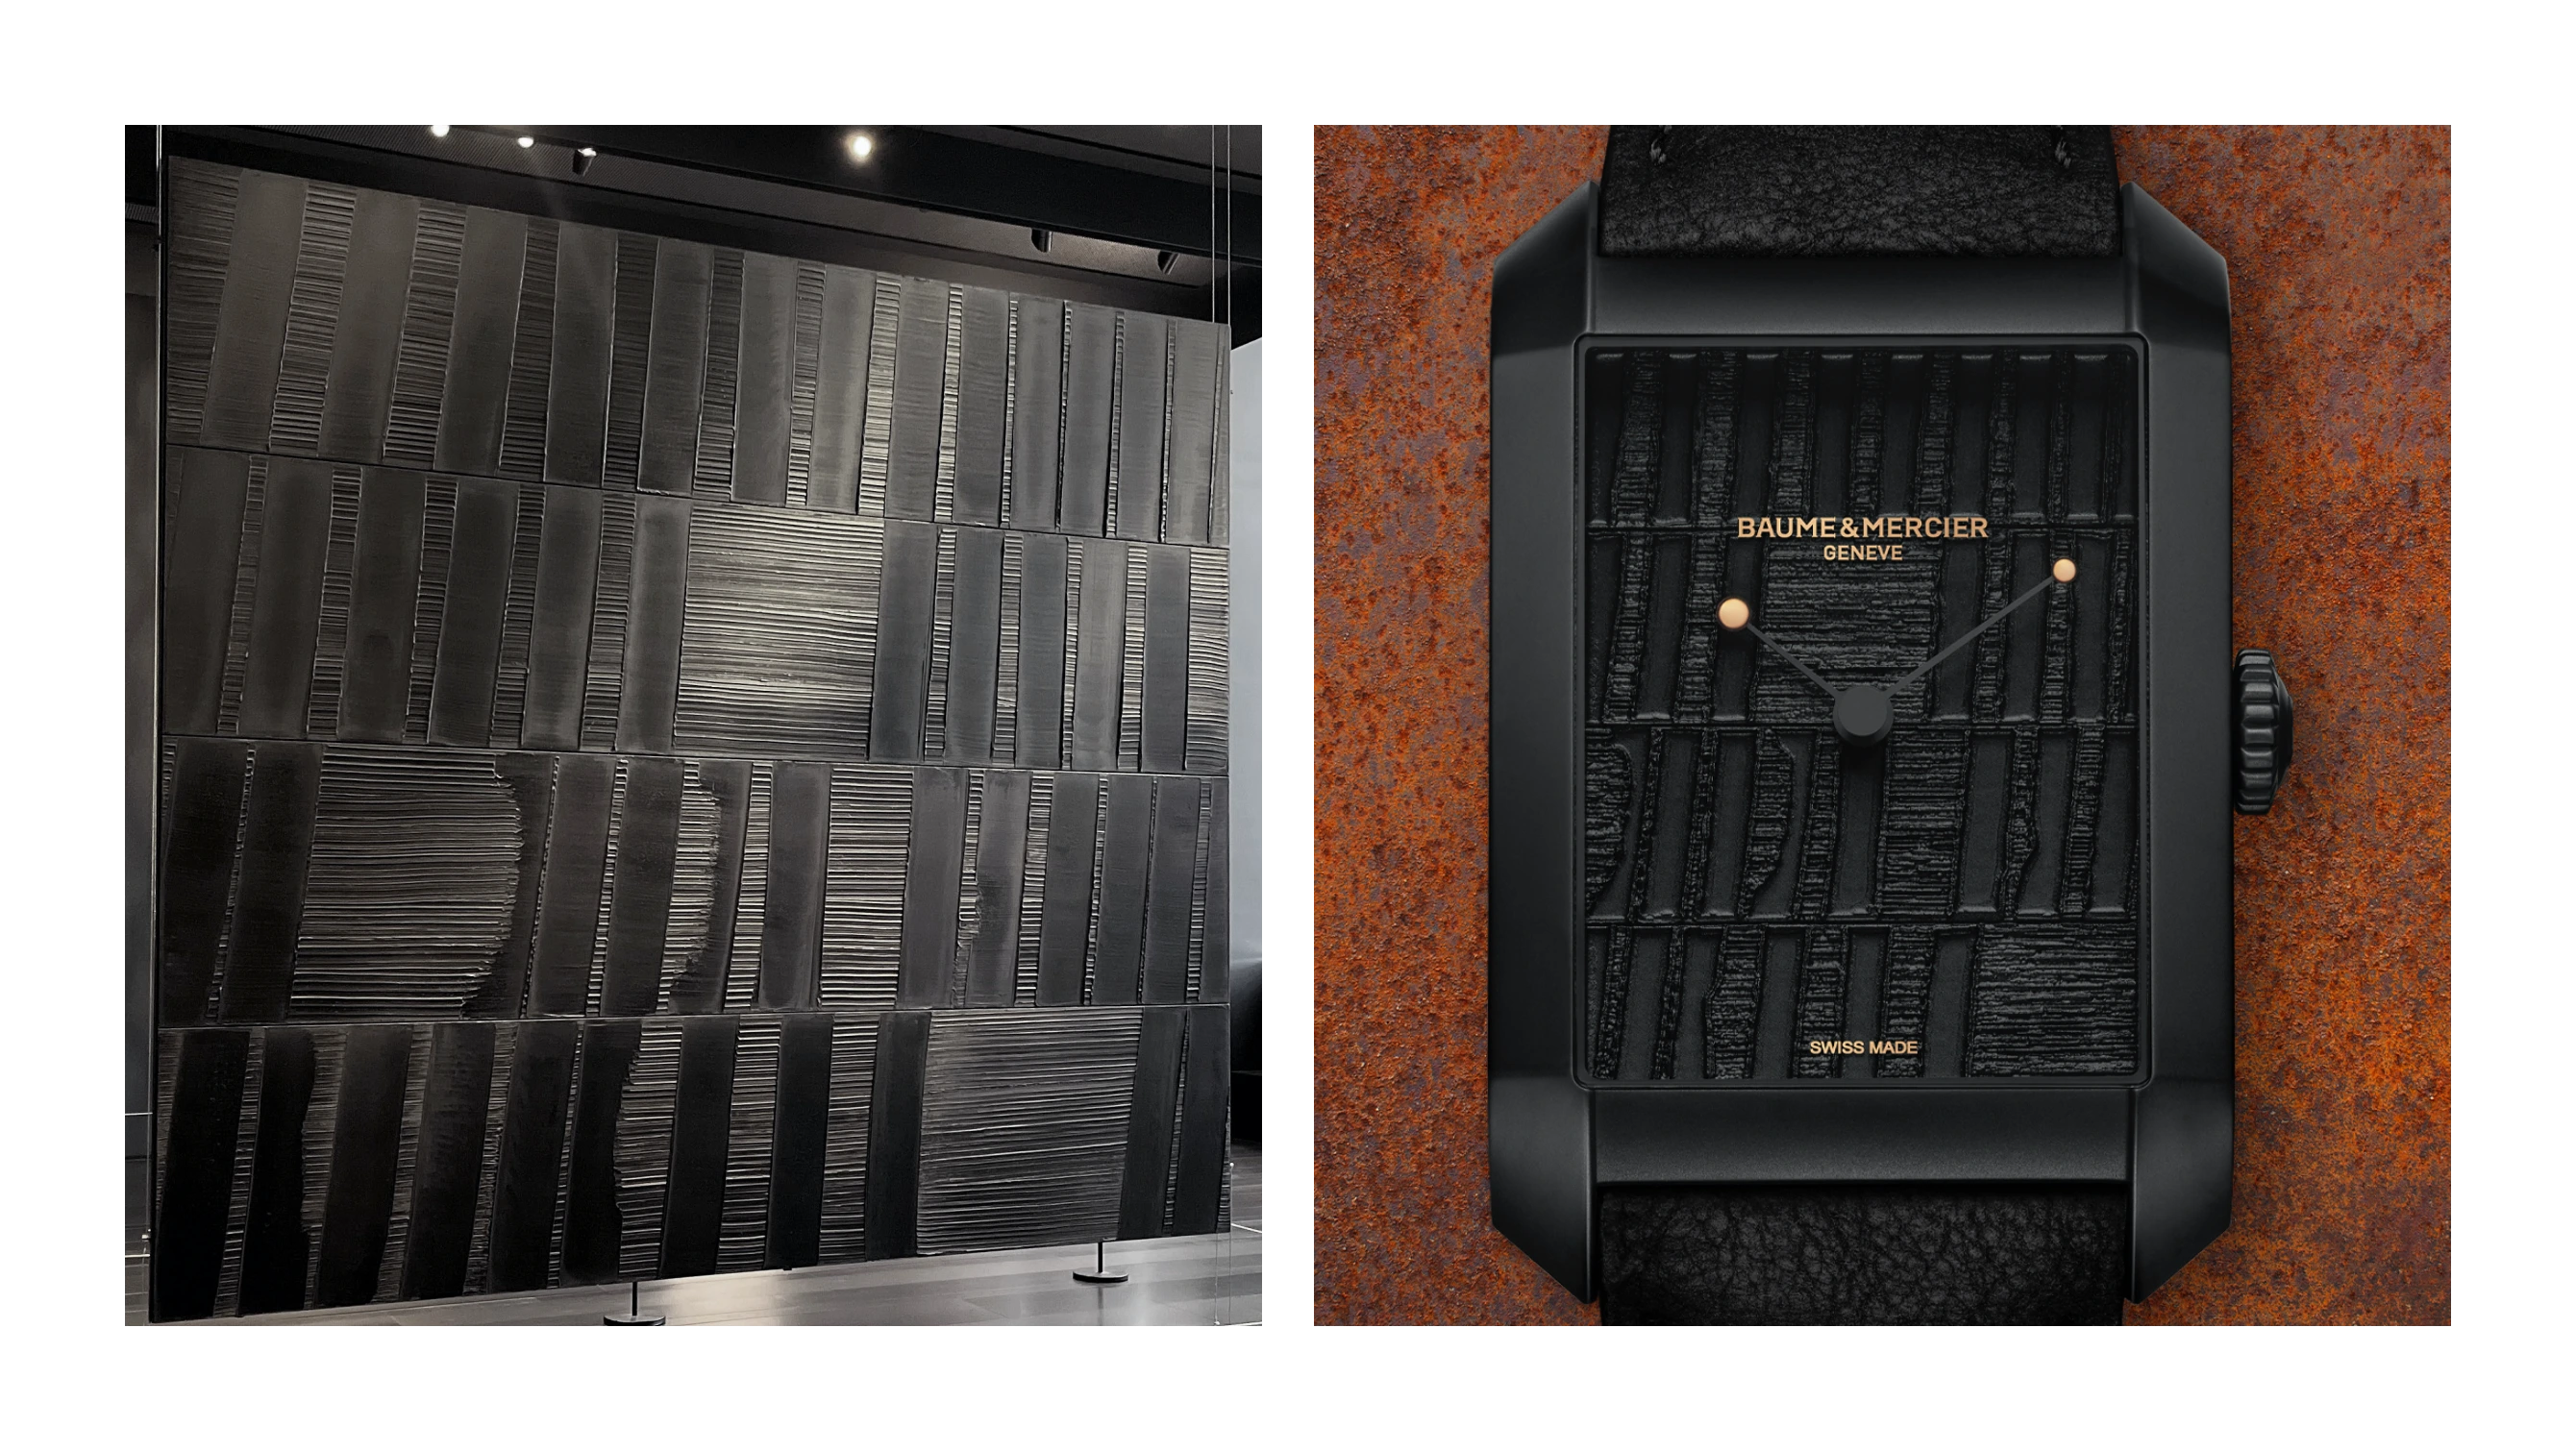 Baume & Mercier debut a new Soulages sequel with another stunning painting-inspired dial